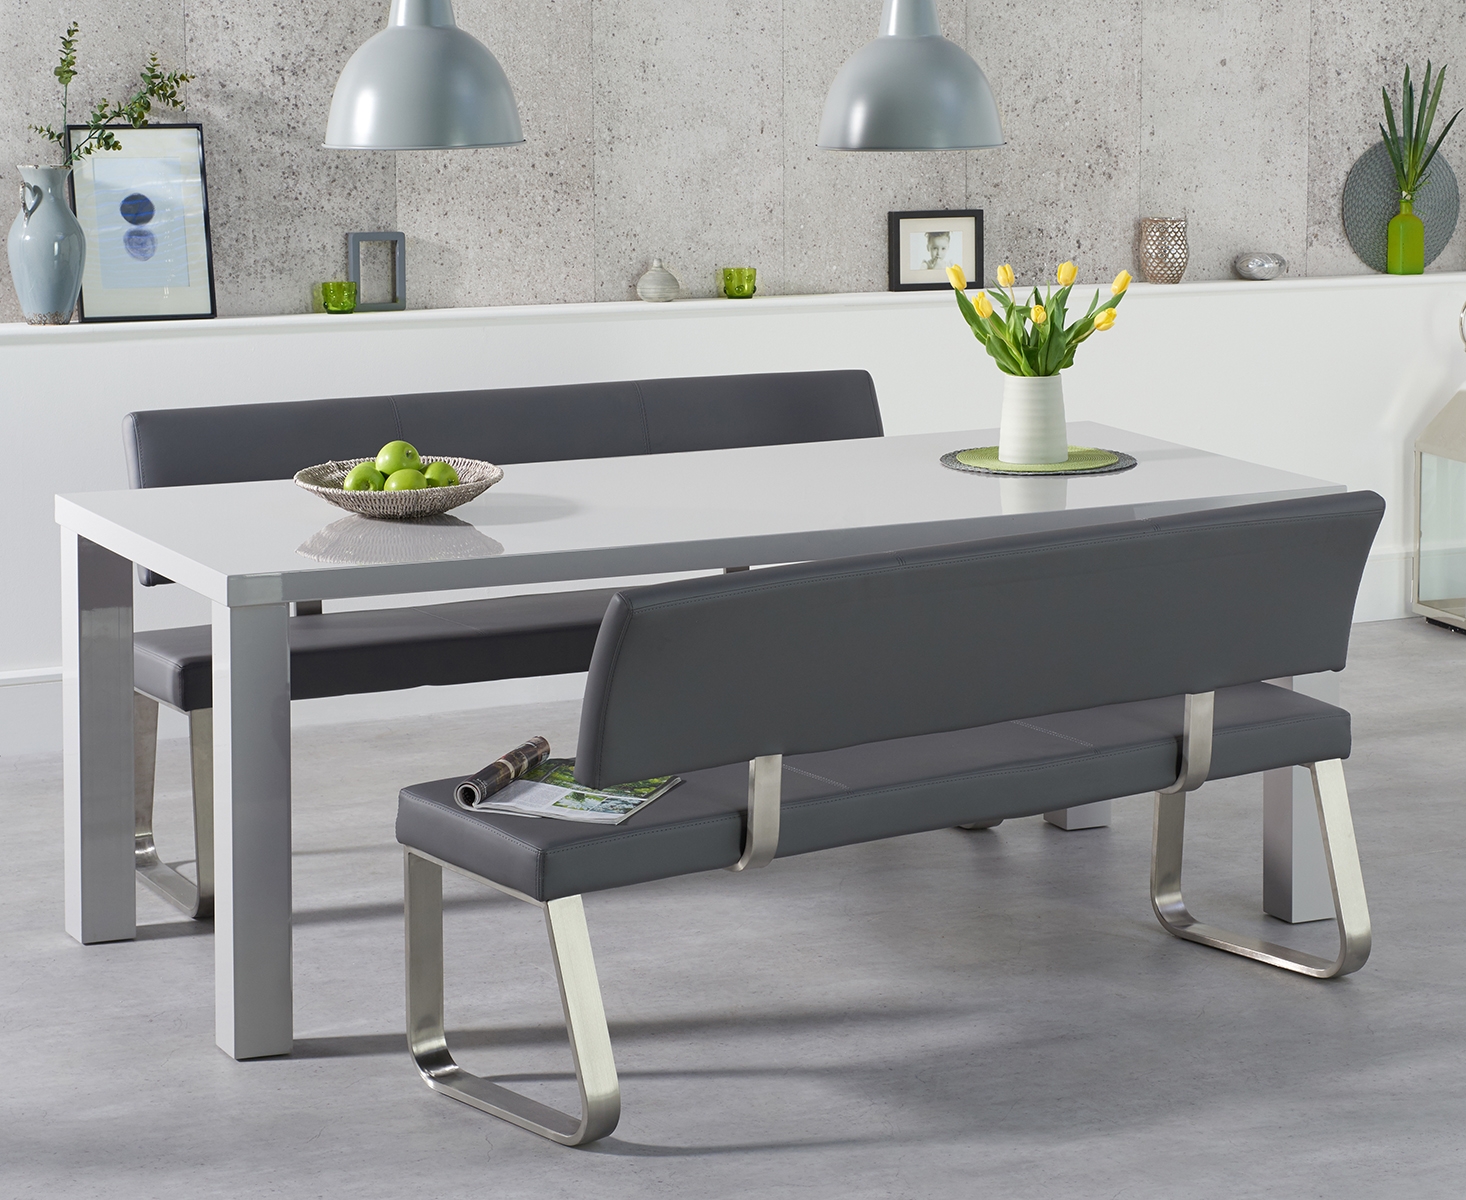 Atlanta 200cm Light Grey High Gloss Dining Table With Austin Benches With Backs